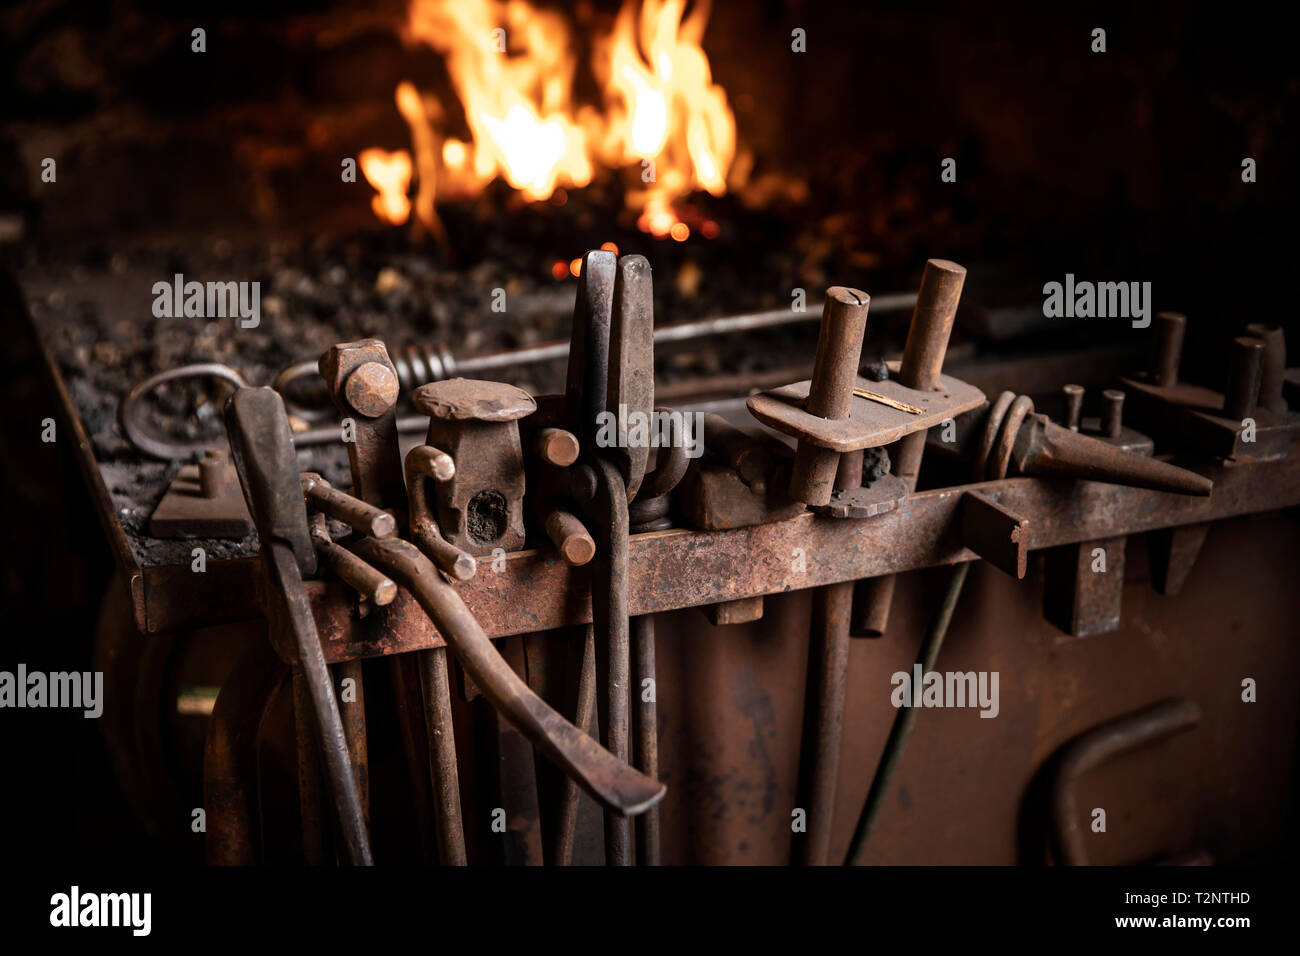 Row of tools in front of fire in blacksmiths workshop Stock Photo